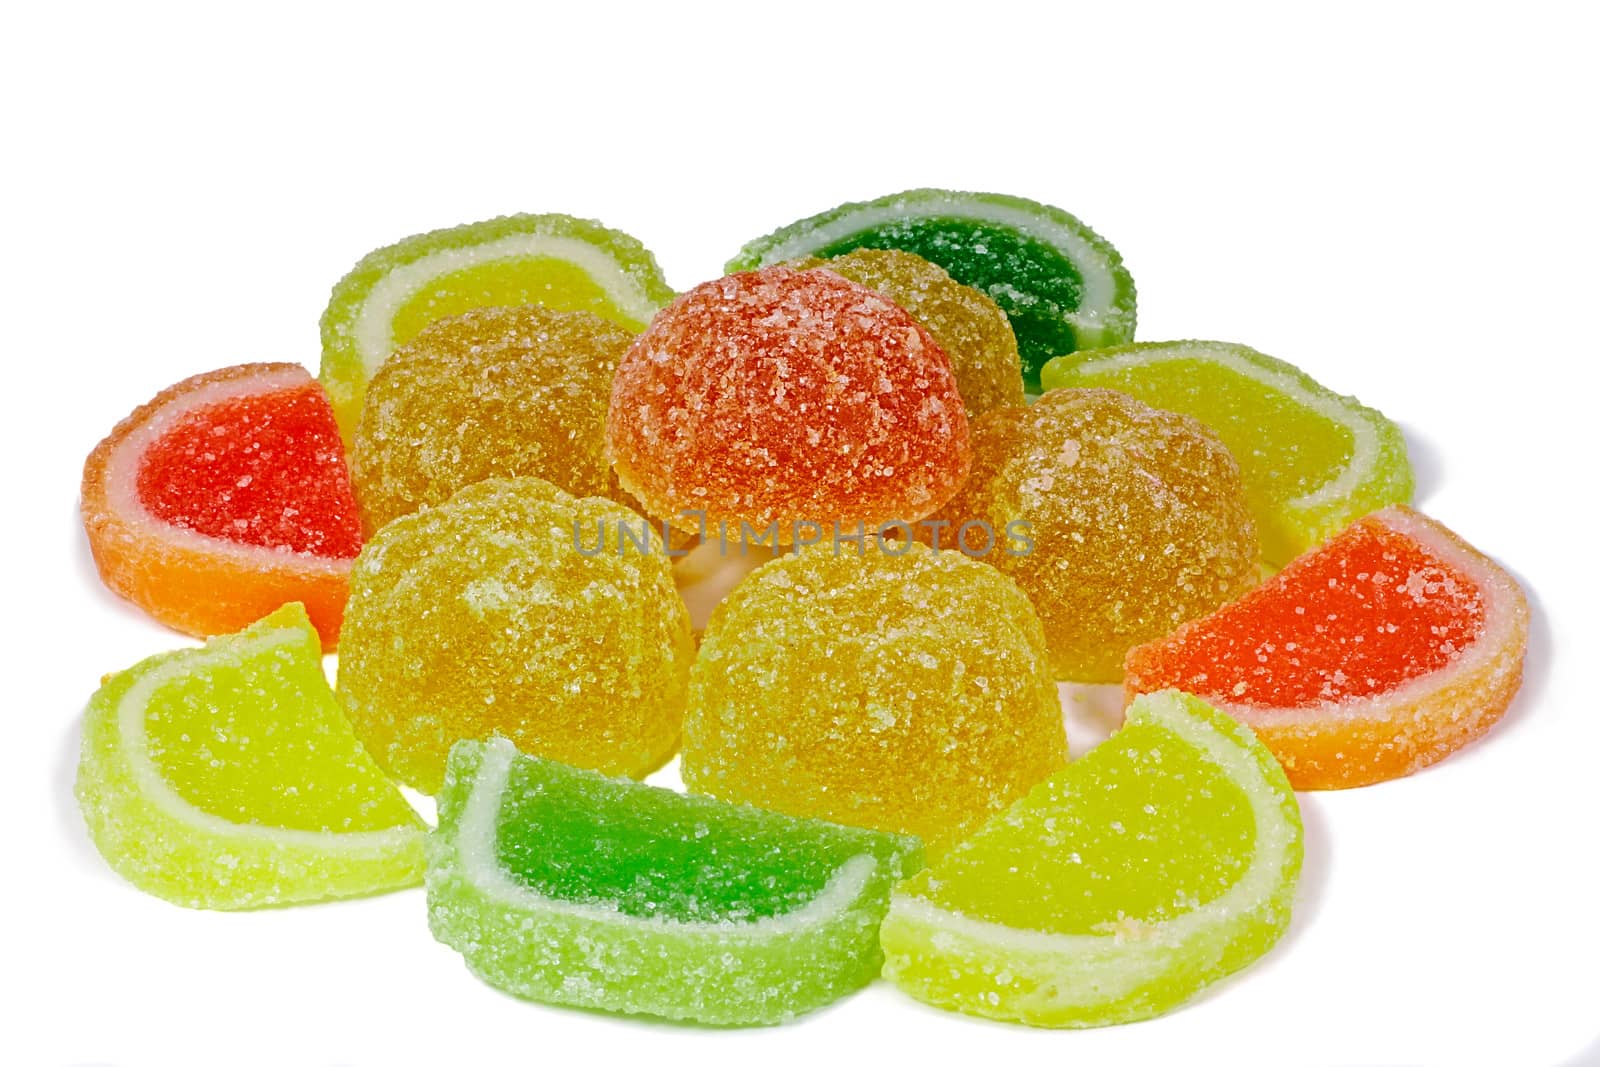 Candy marmalade with various colors and forms. Presented on a white background.